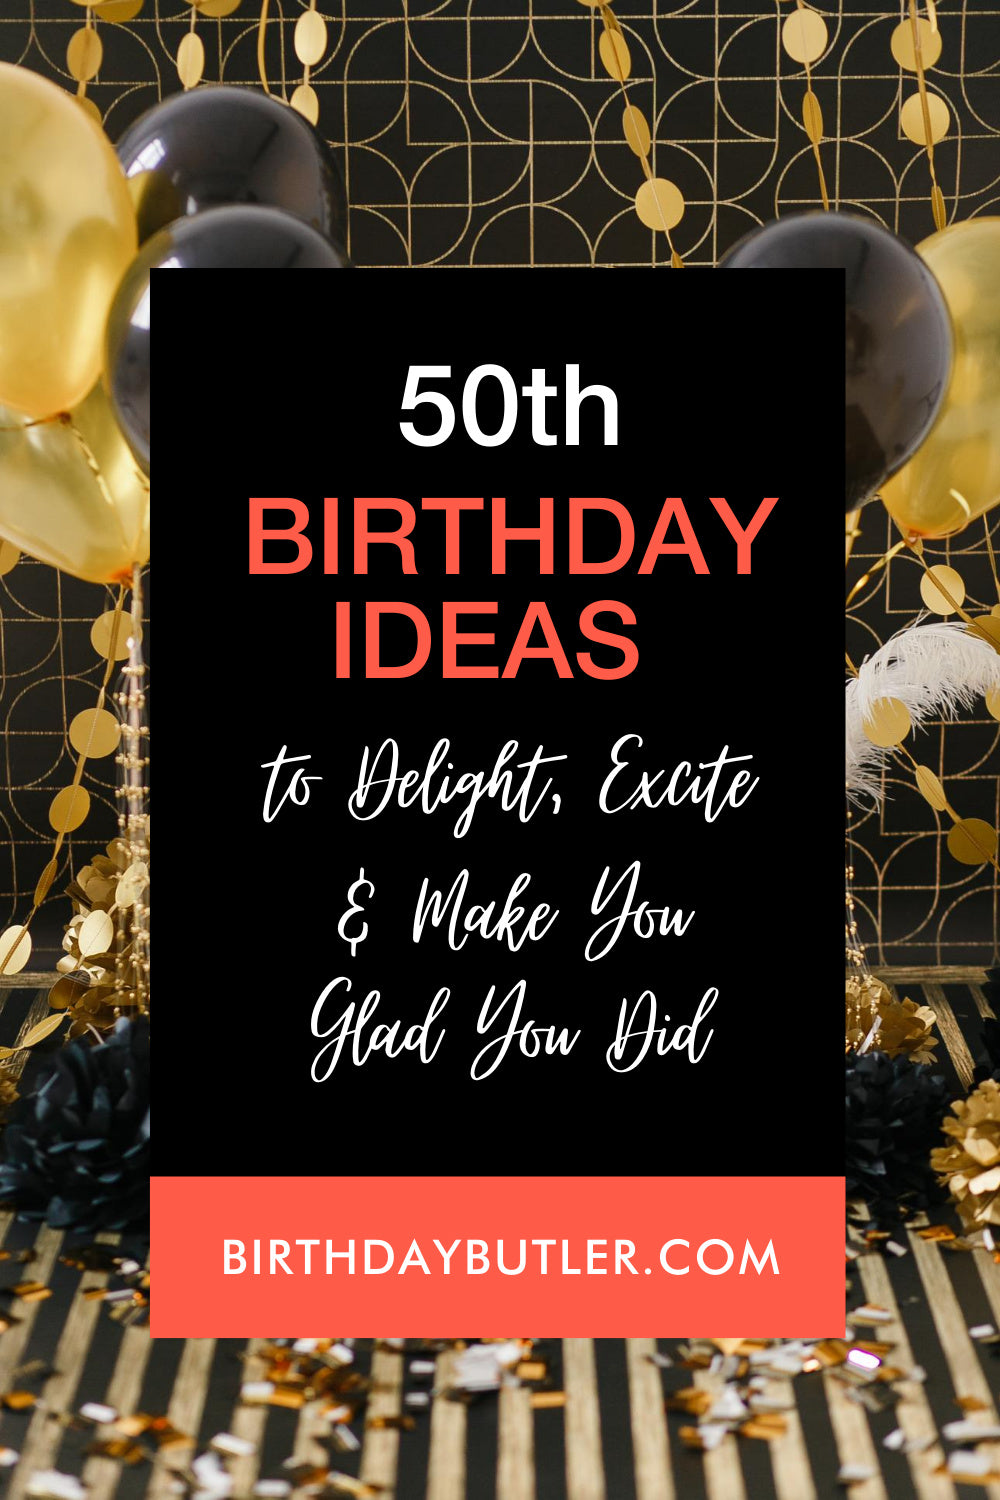 50th-birthday-ideas-to-delight-excite-and-make-you-glad-did-birthday-butler